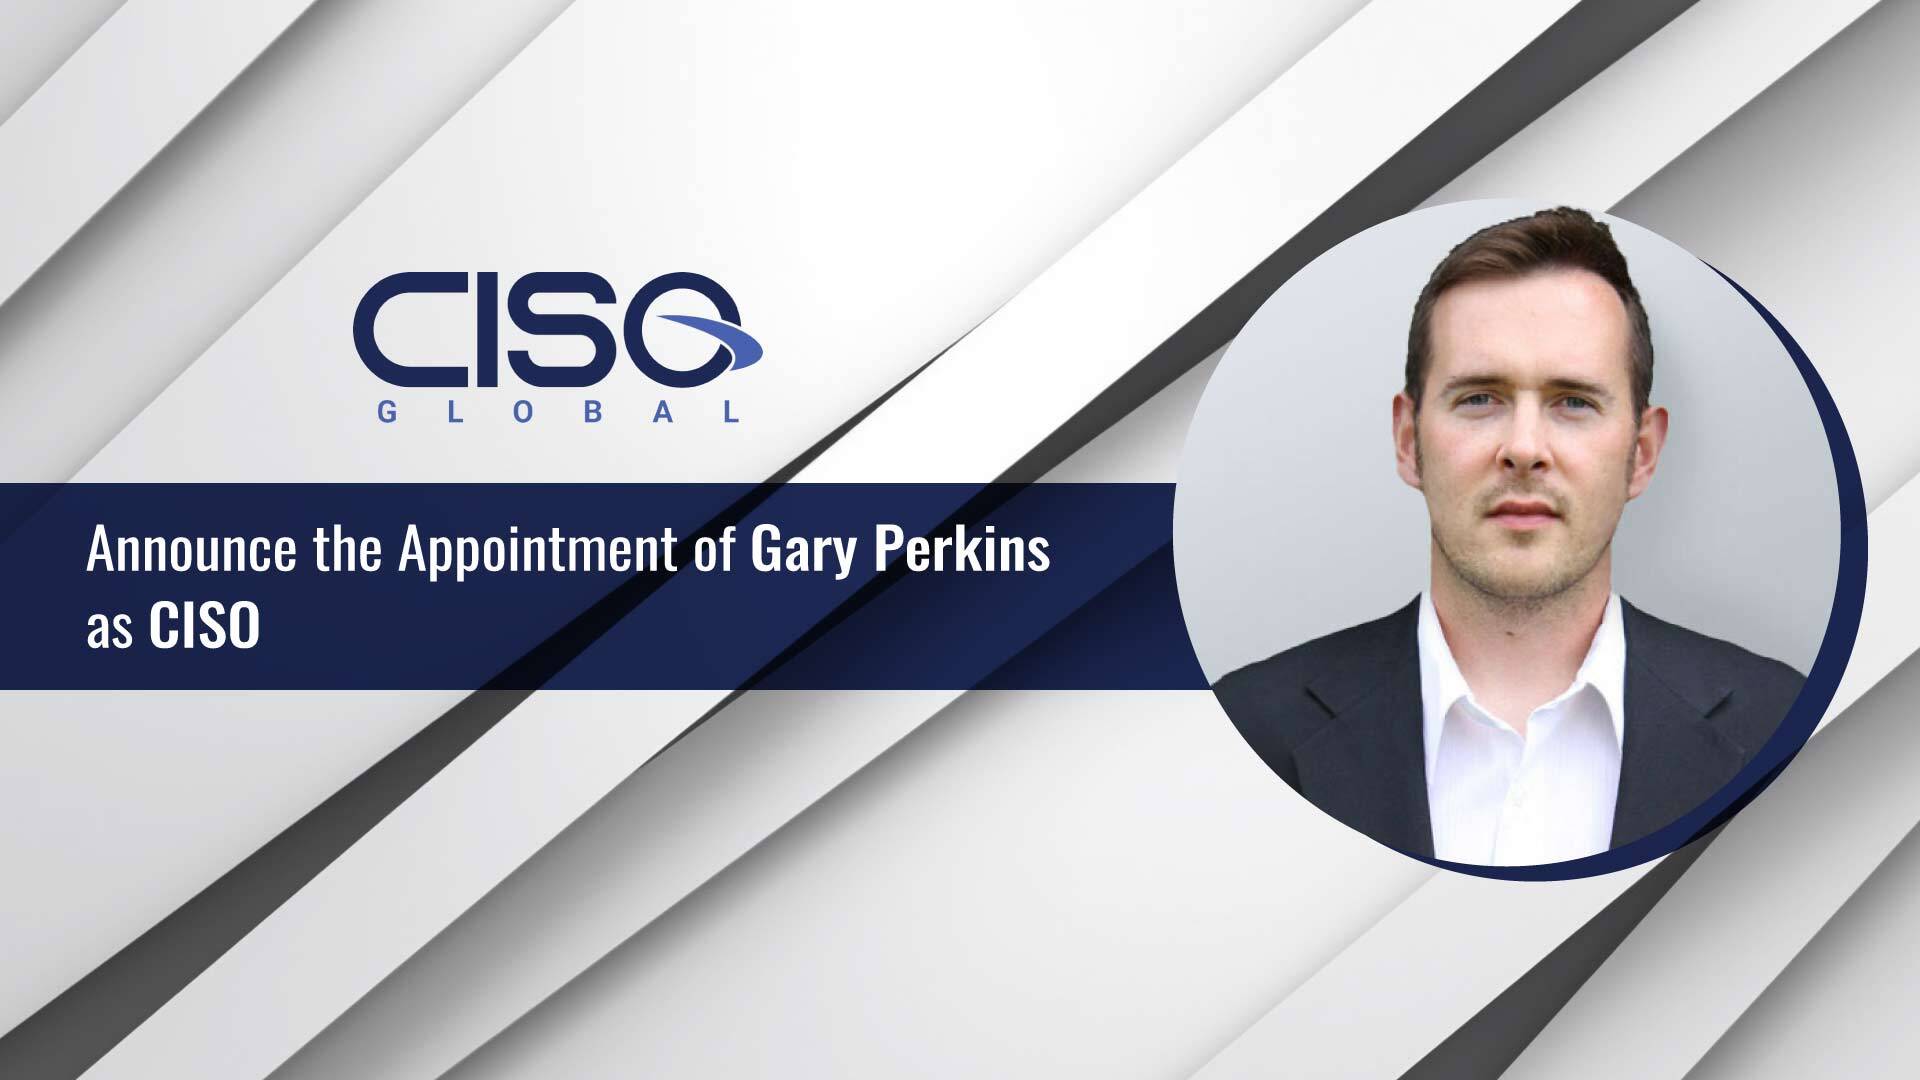 CISO Global Names Industry Veteran Gary Perkins as Chief Information Security Officer